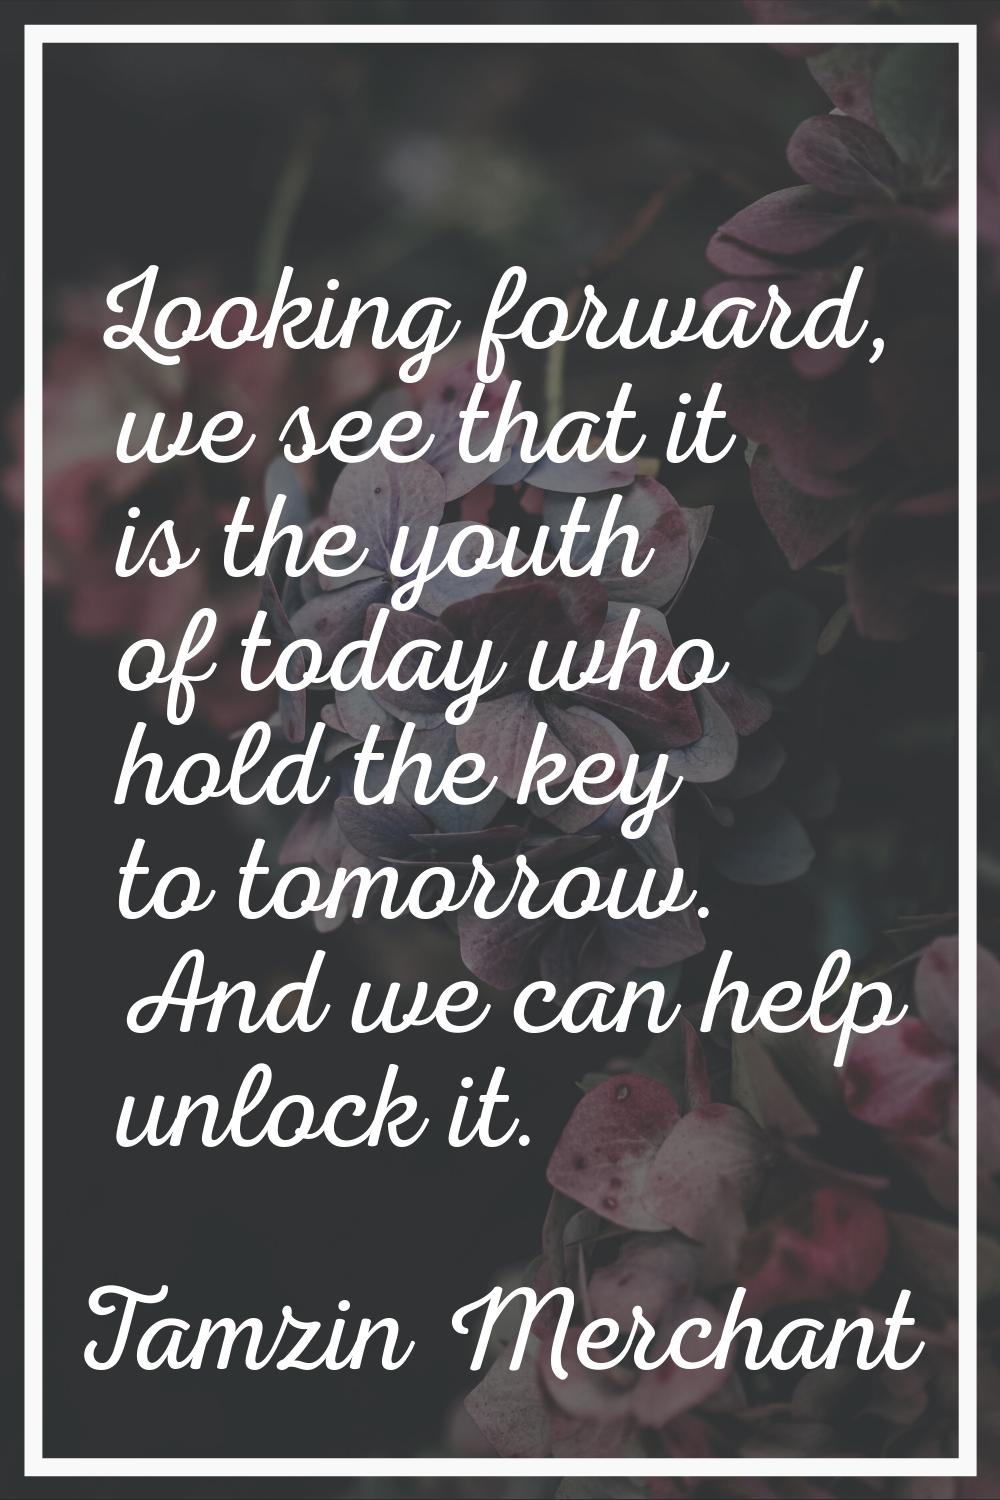 Looking forward, we see that it is the youth of today who hold the key to tomorrow. And we can help